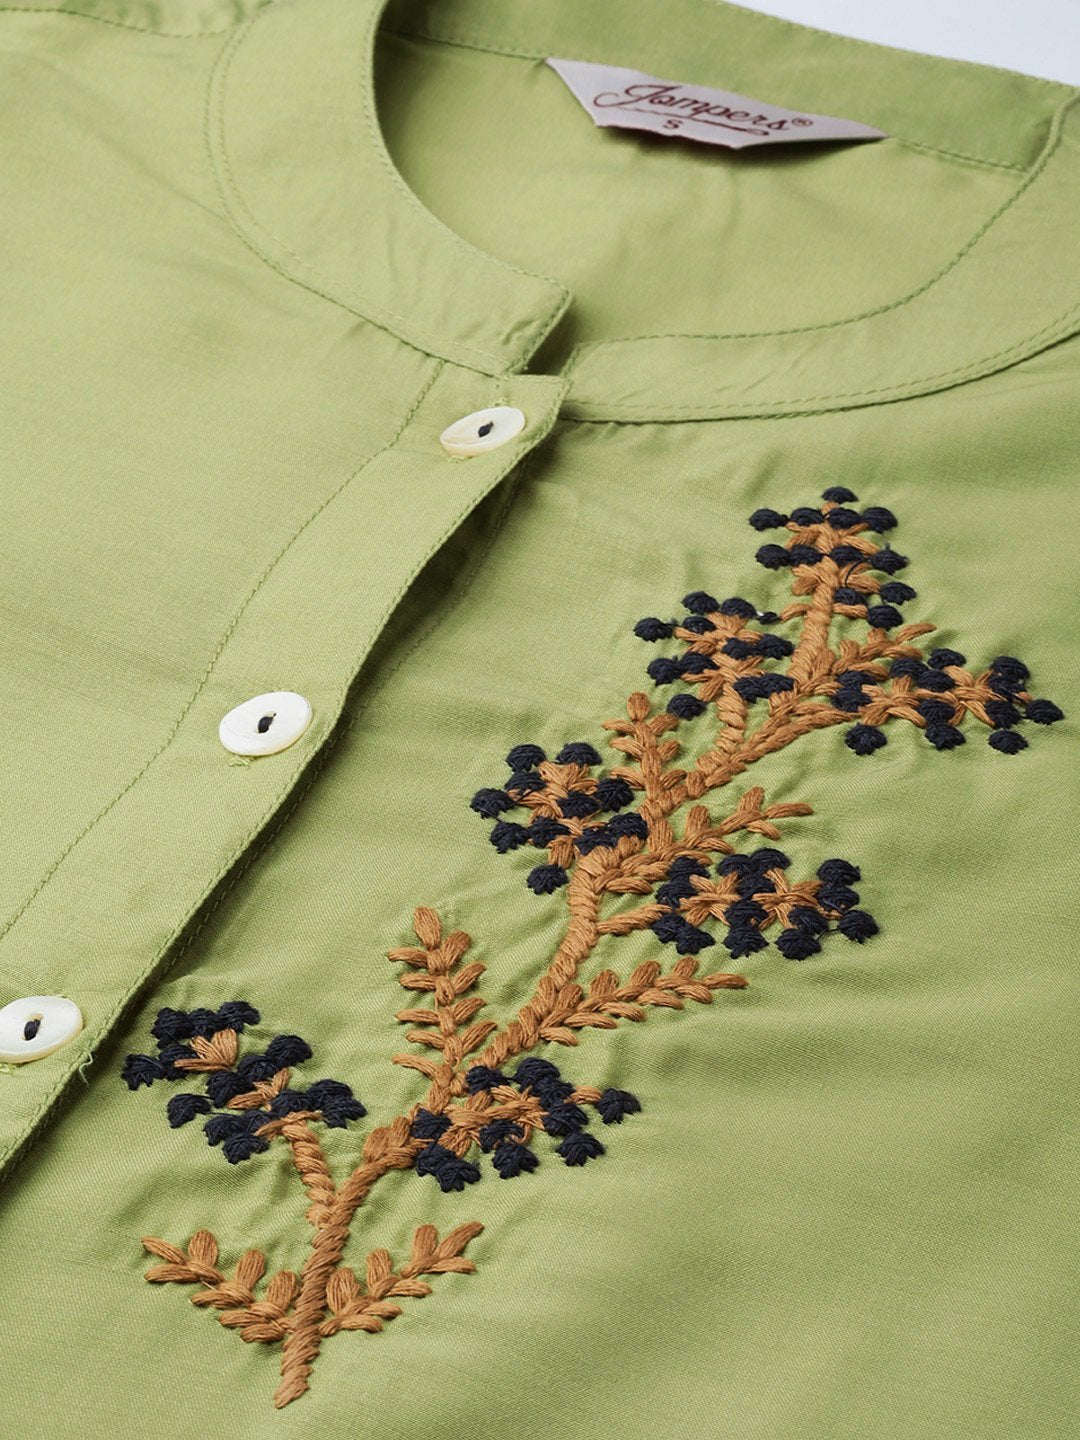 Women's Green Embroidered Detail Kurta with Trousers - Jompers